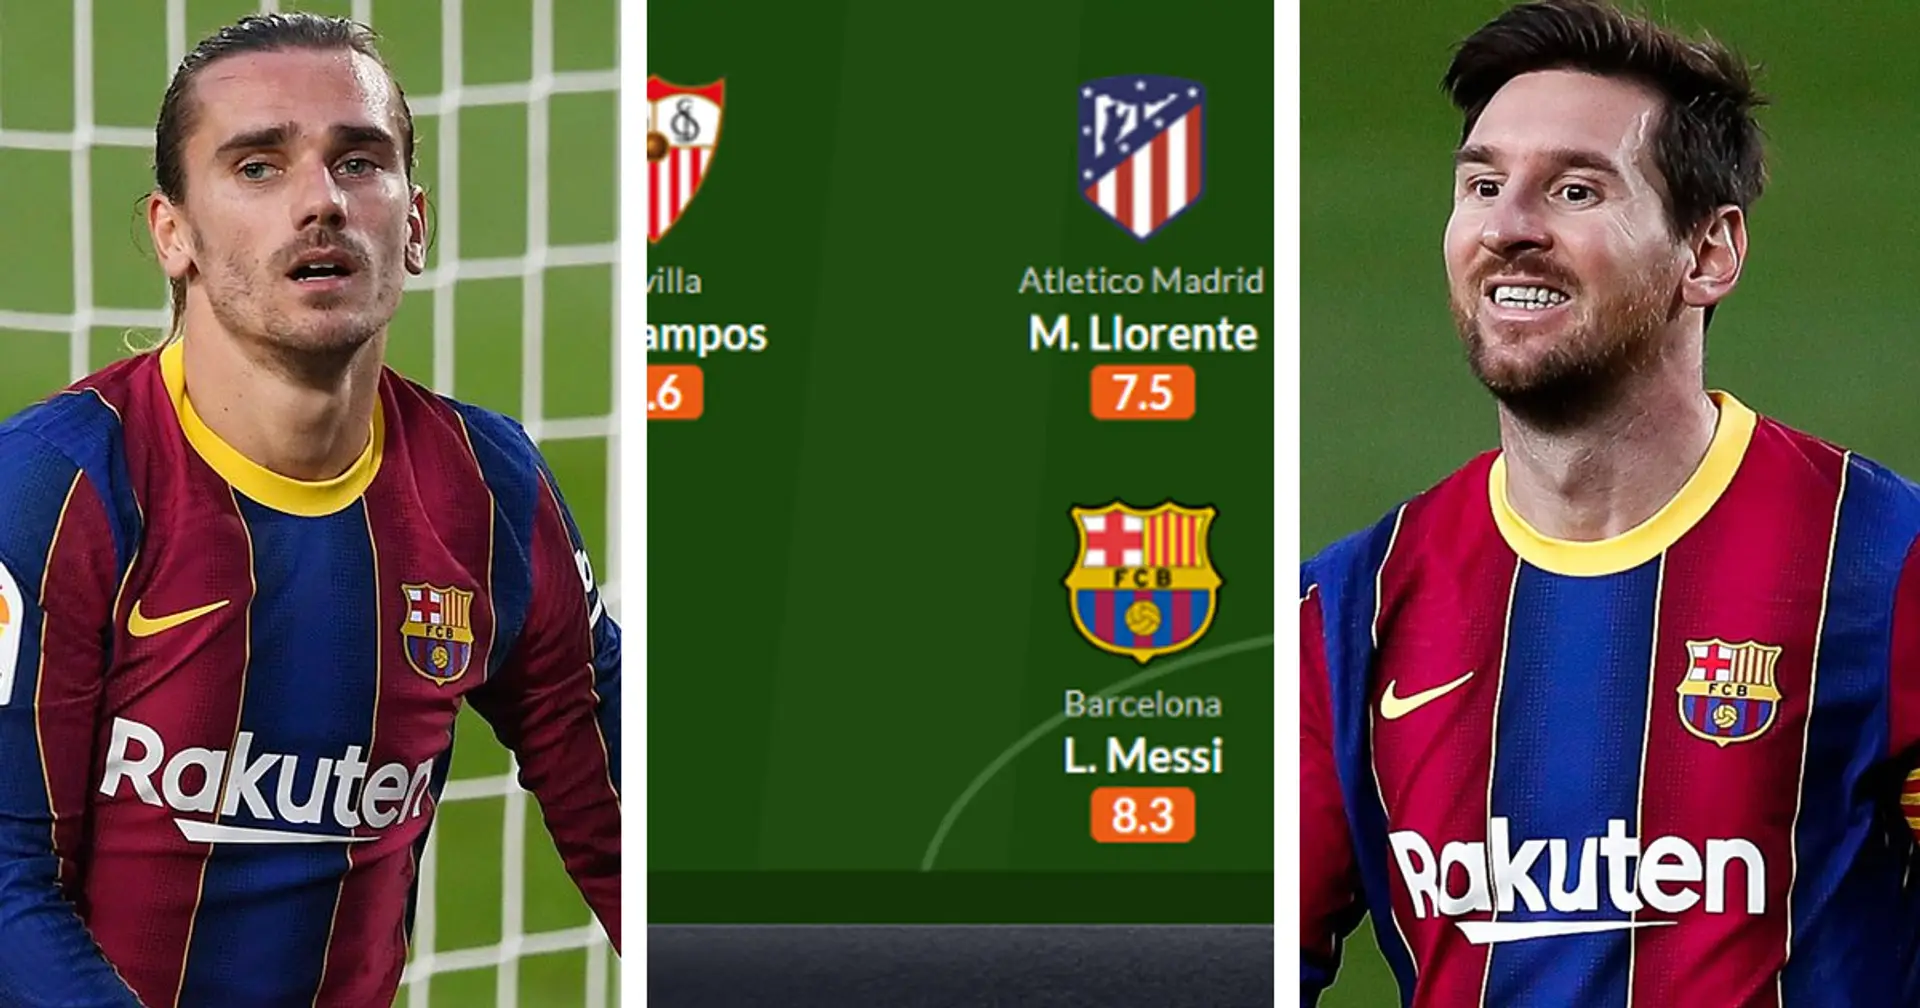 Messi and Griezmann included in WhoScored's La Liga team of the month for November